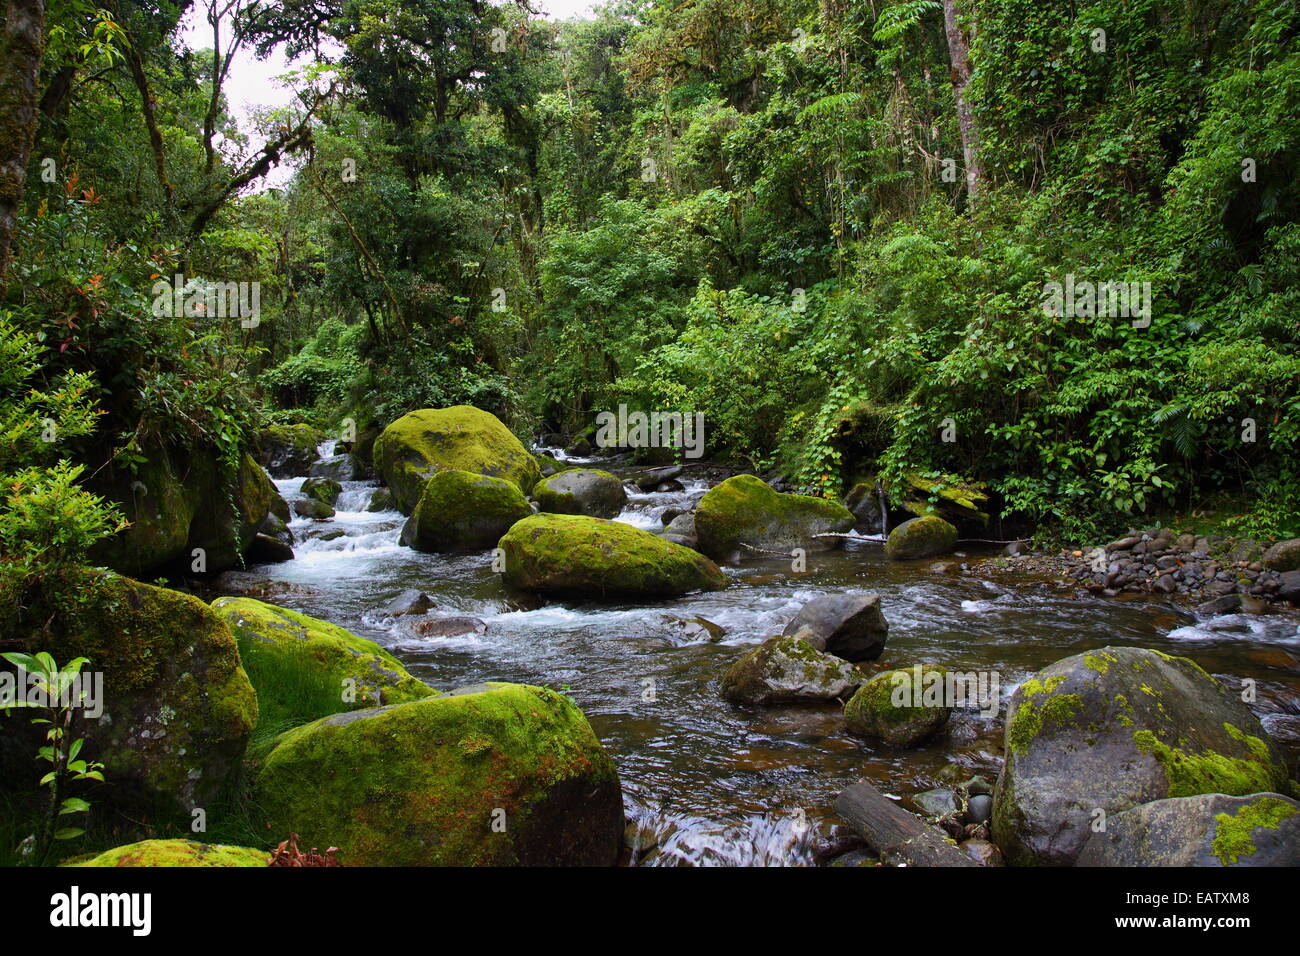 The Rio Savegre coursing through a lush scenic cloud forest. Stock Photo